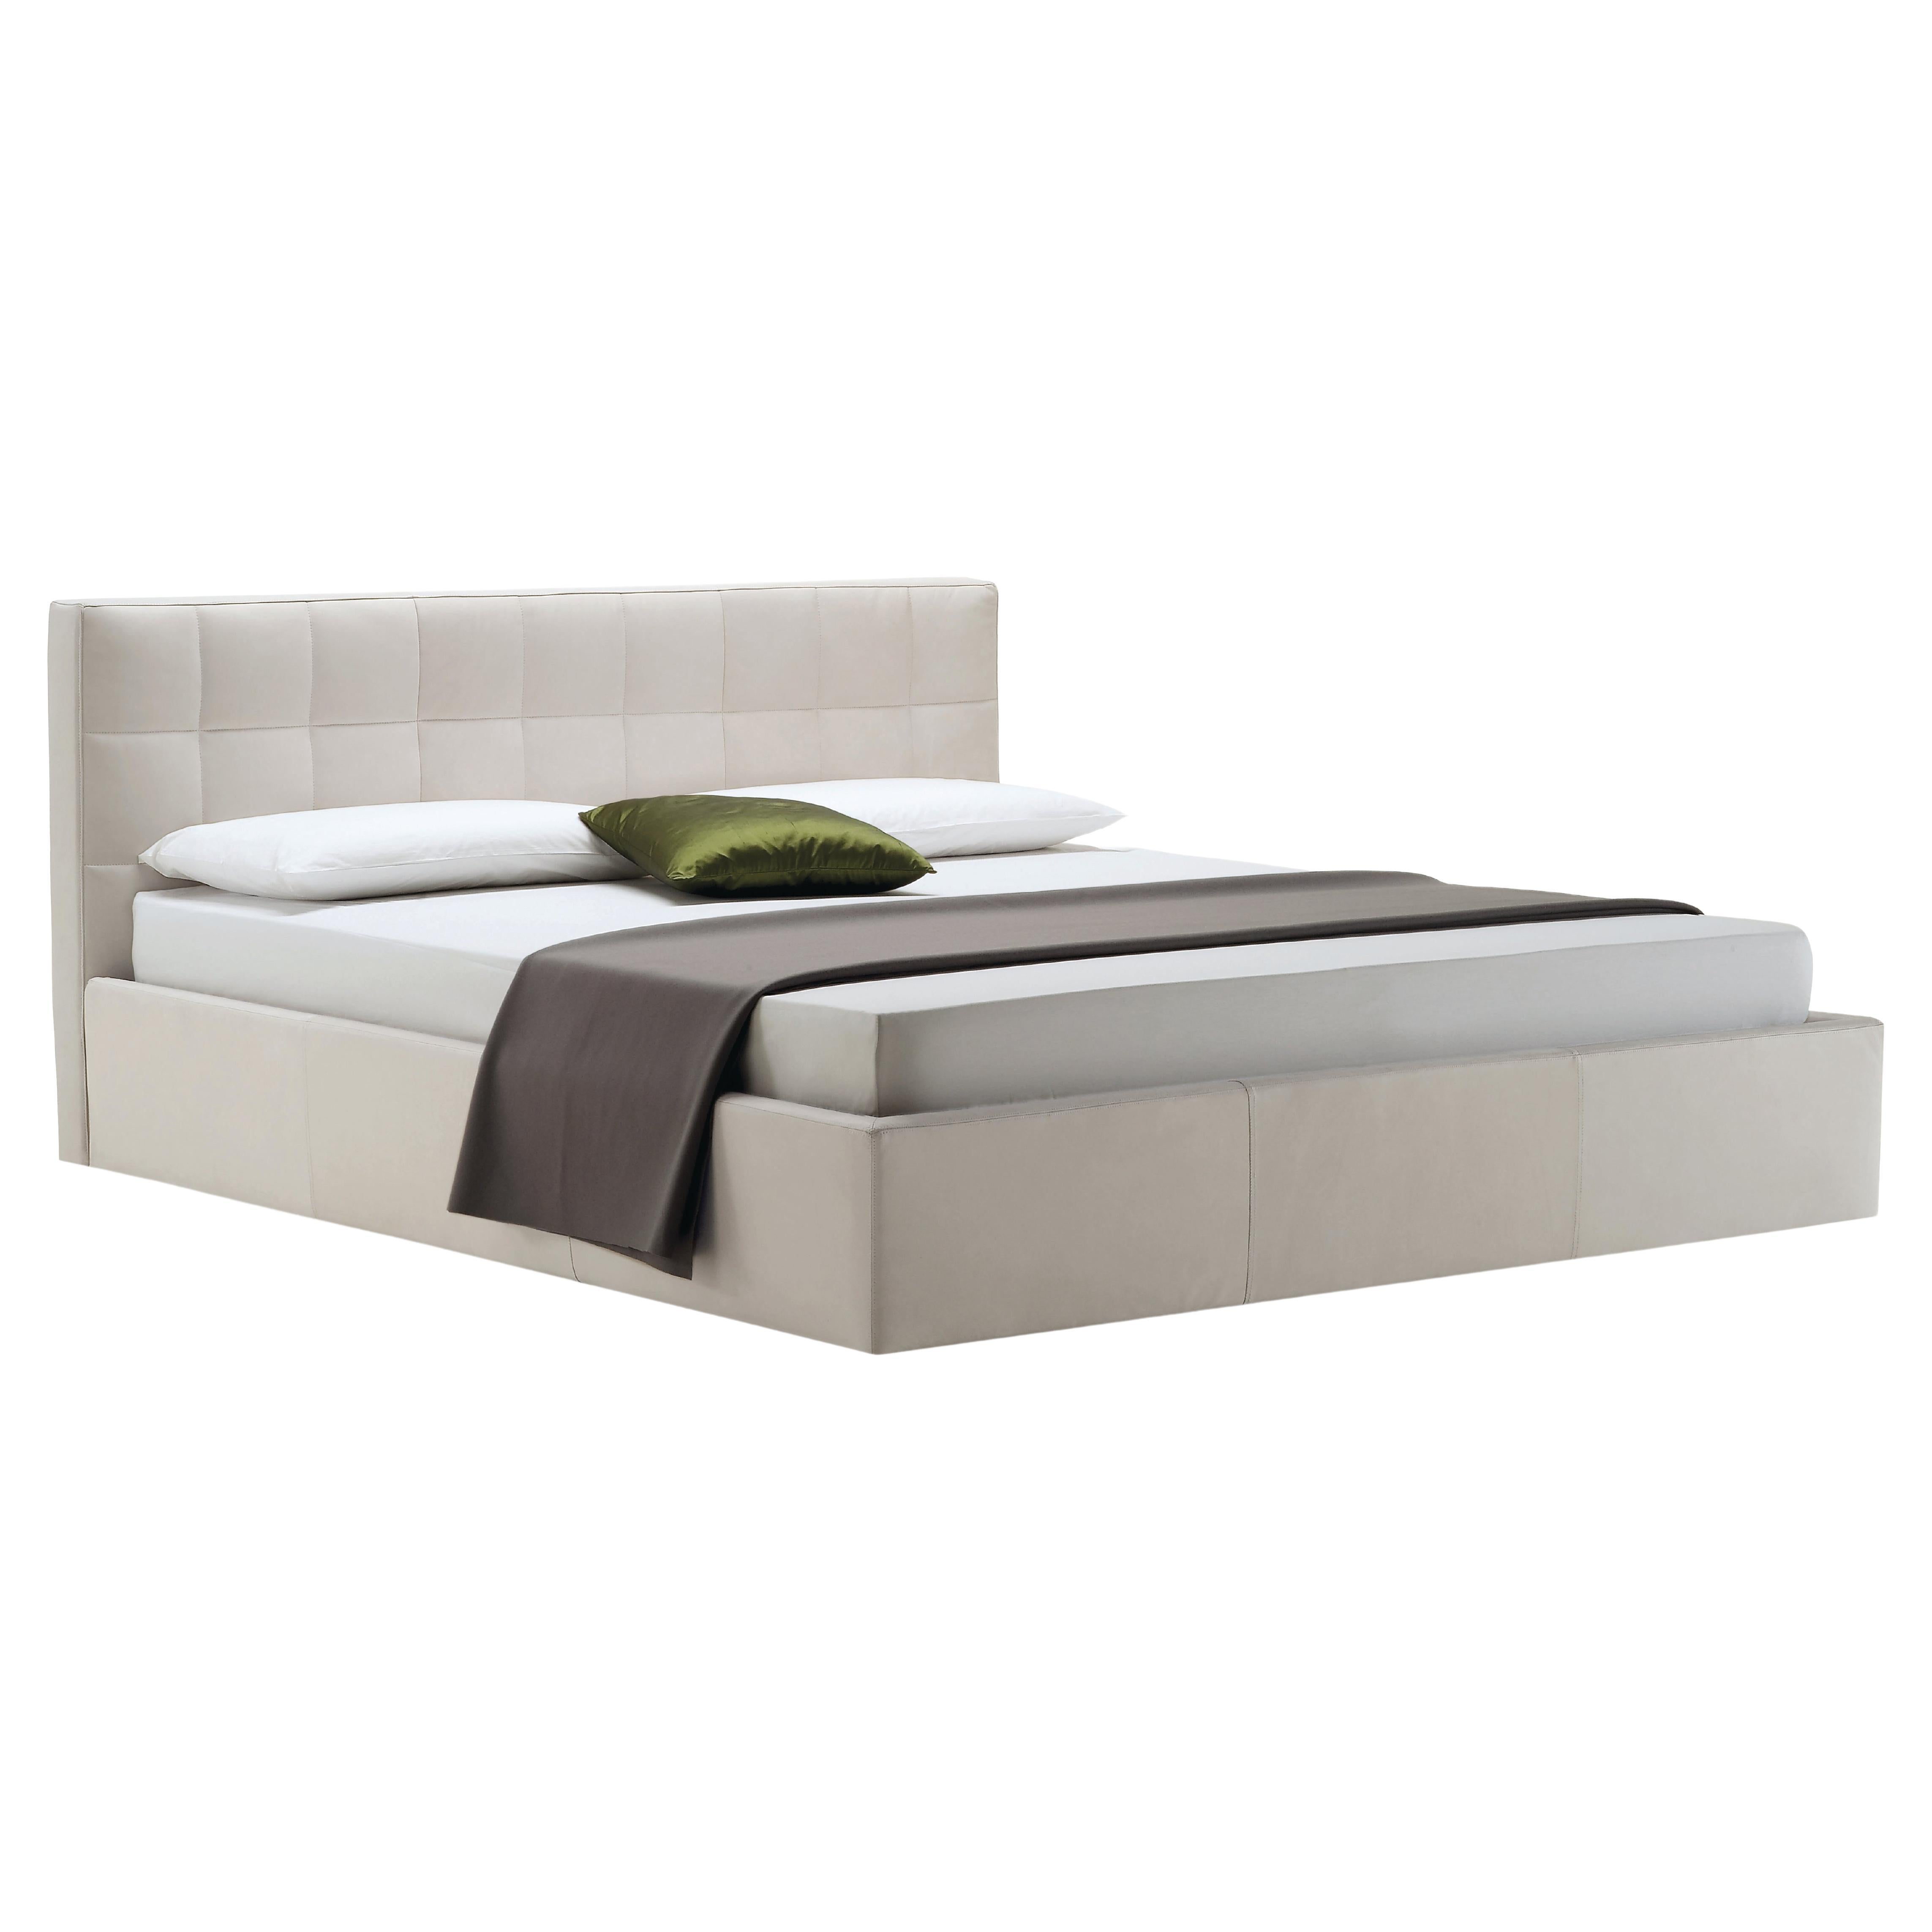 Zanotta Queen Size Box Bed with Container Unit in Beige Upholstery & Steel Frame For Sale